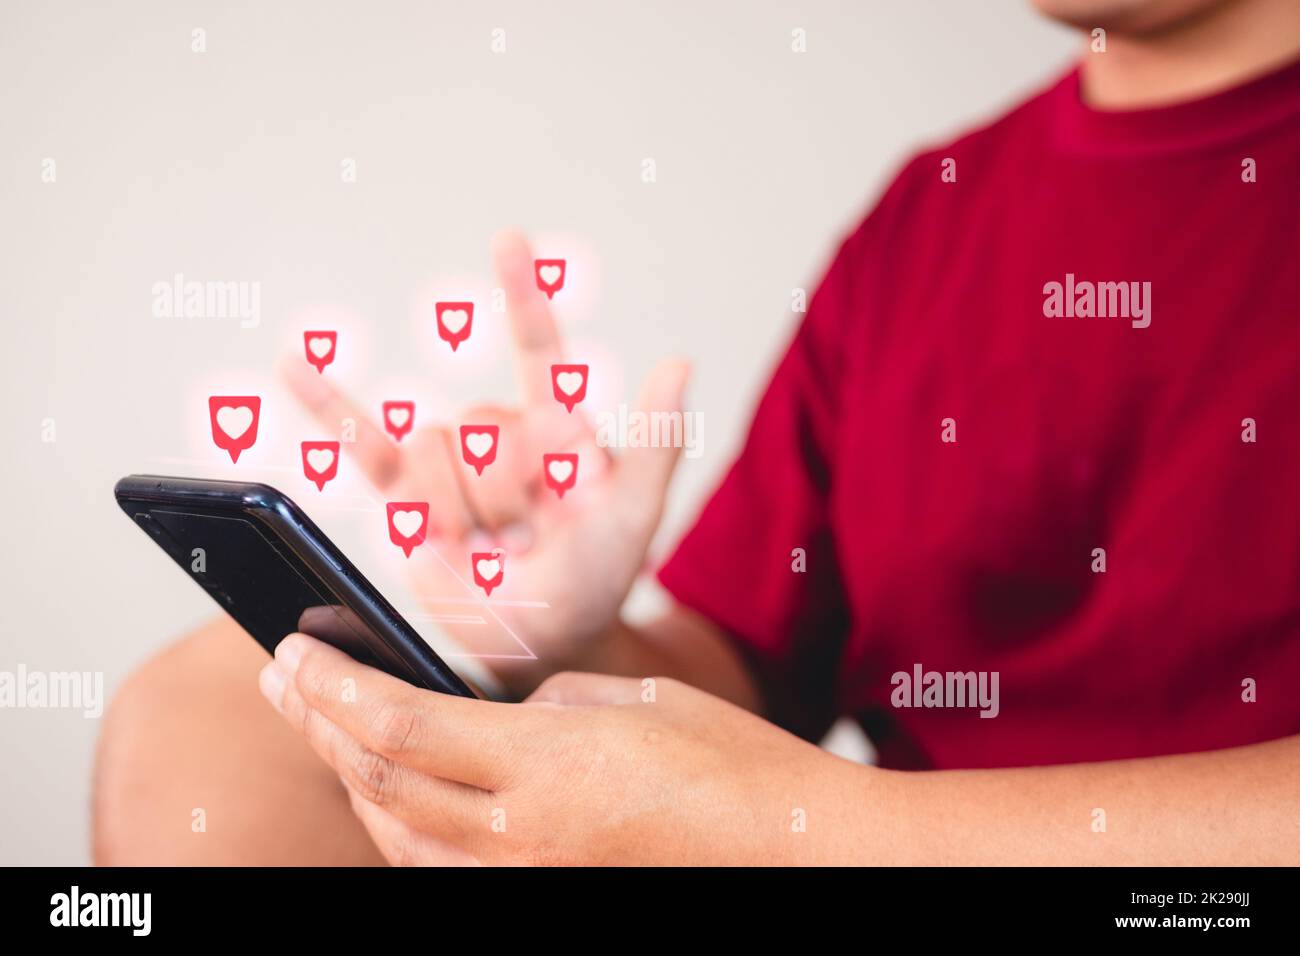 Valentine's day concept. The man uses hand sign to give love thru a smartphone. Heart shape visual effect. Stock Photo